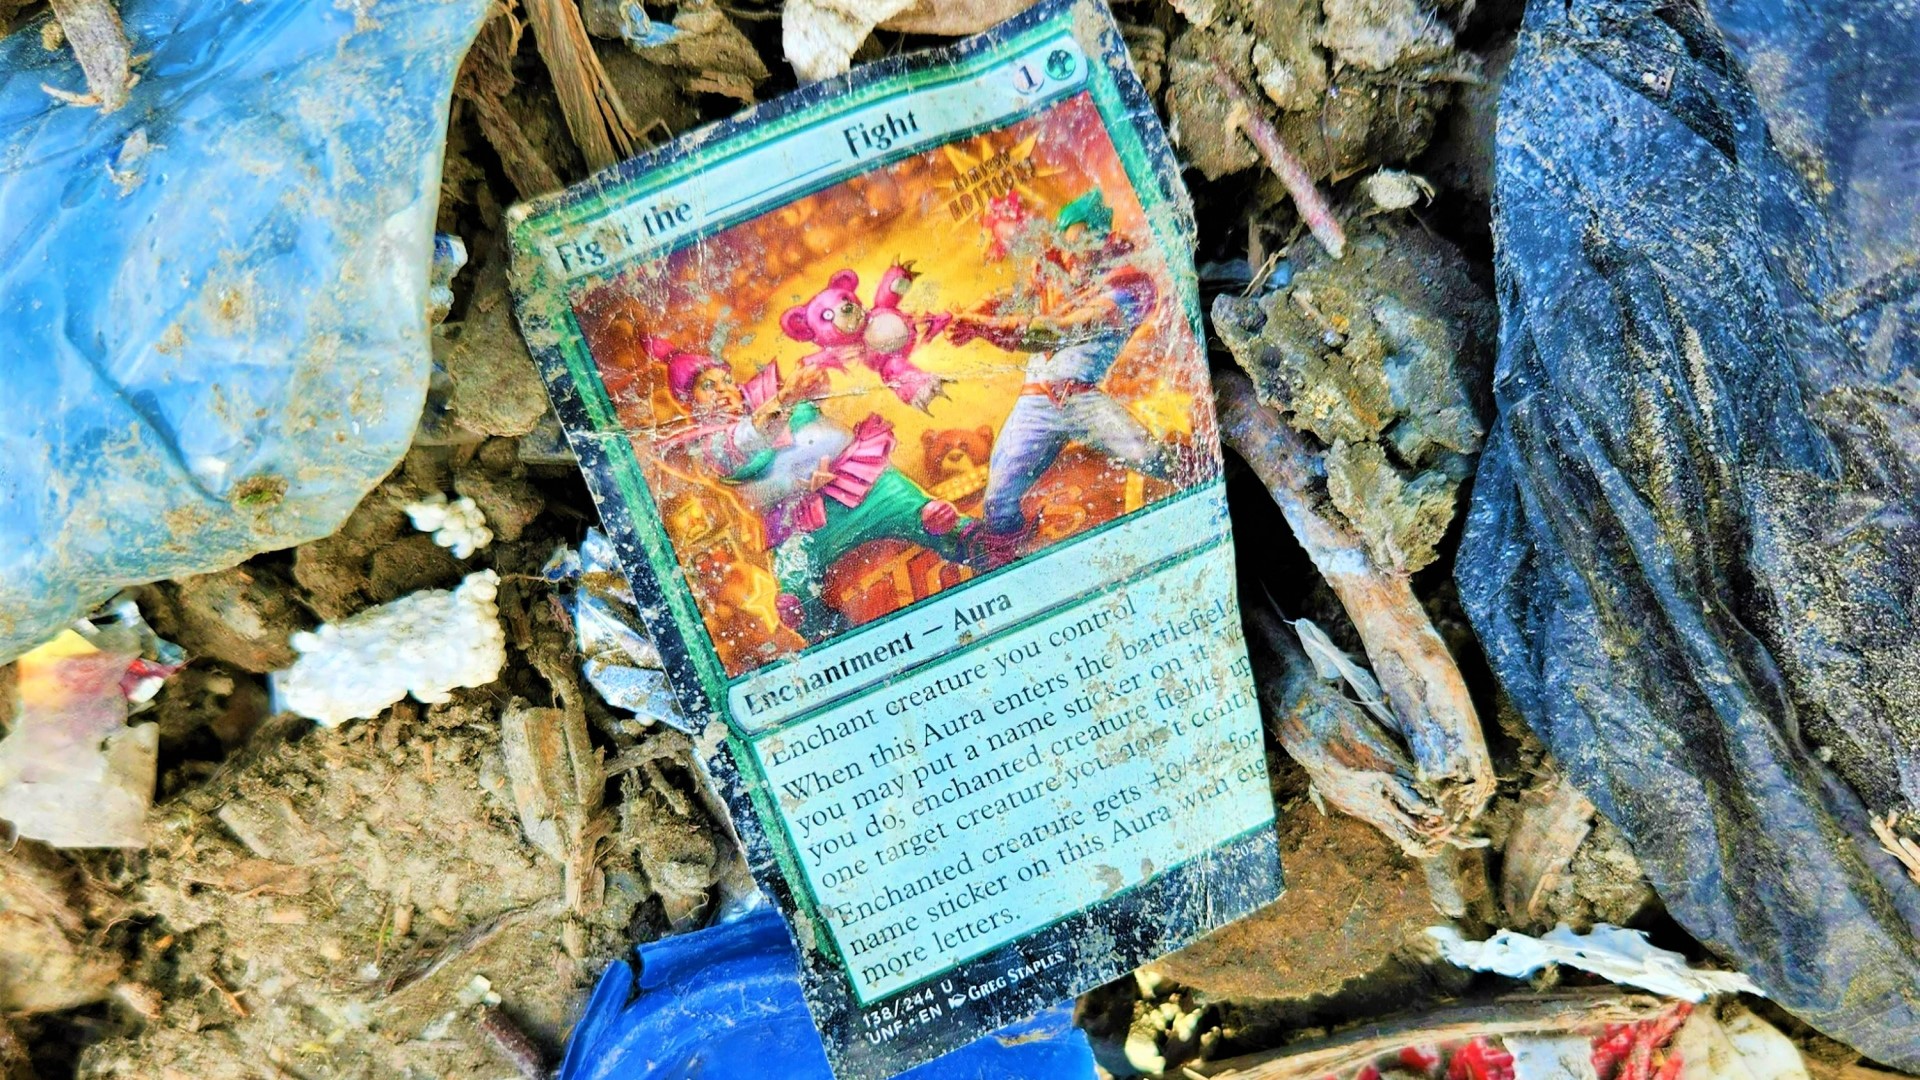 $100,000 worth of Magic cards destroyed in landfill